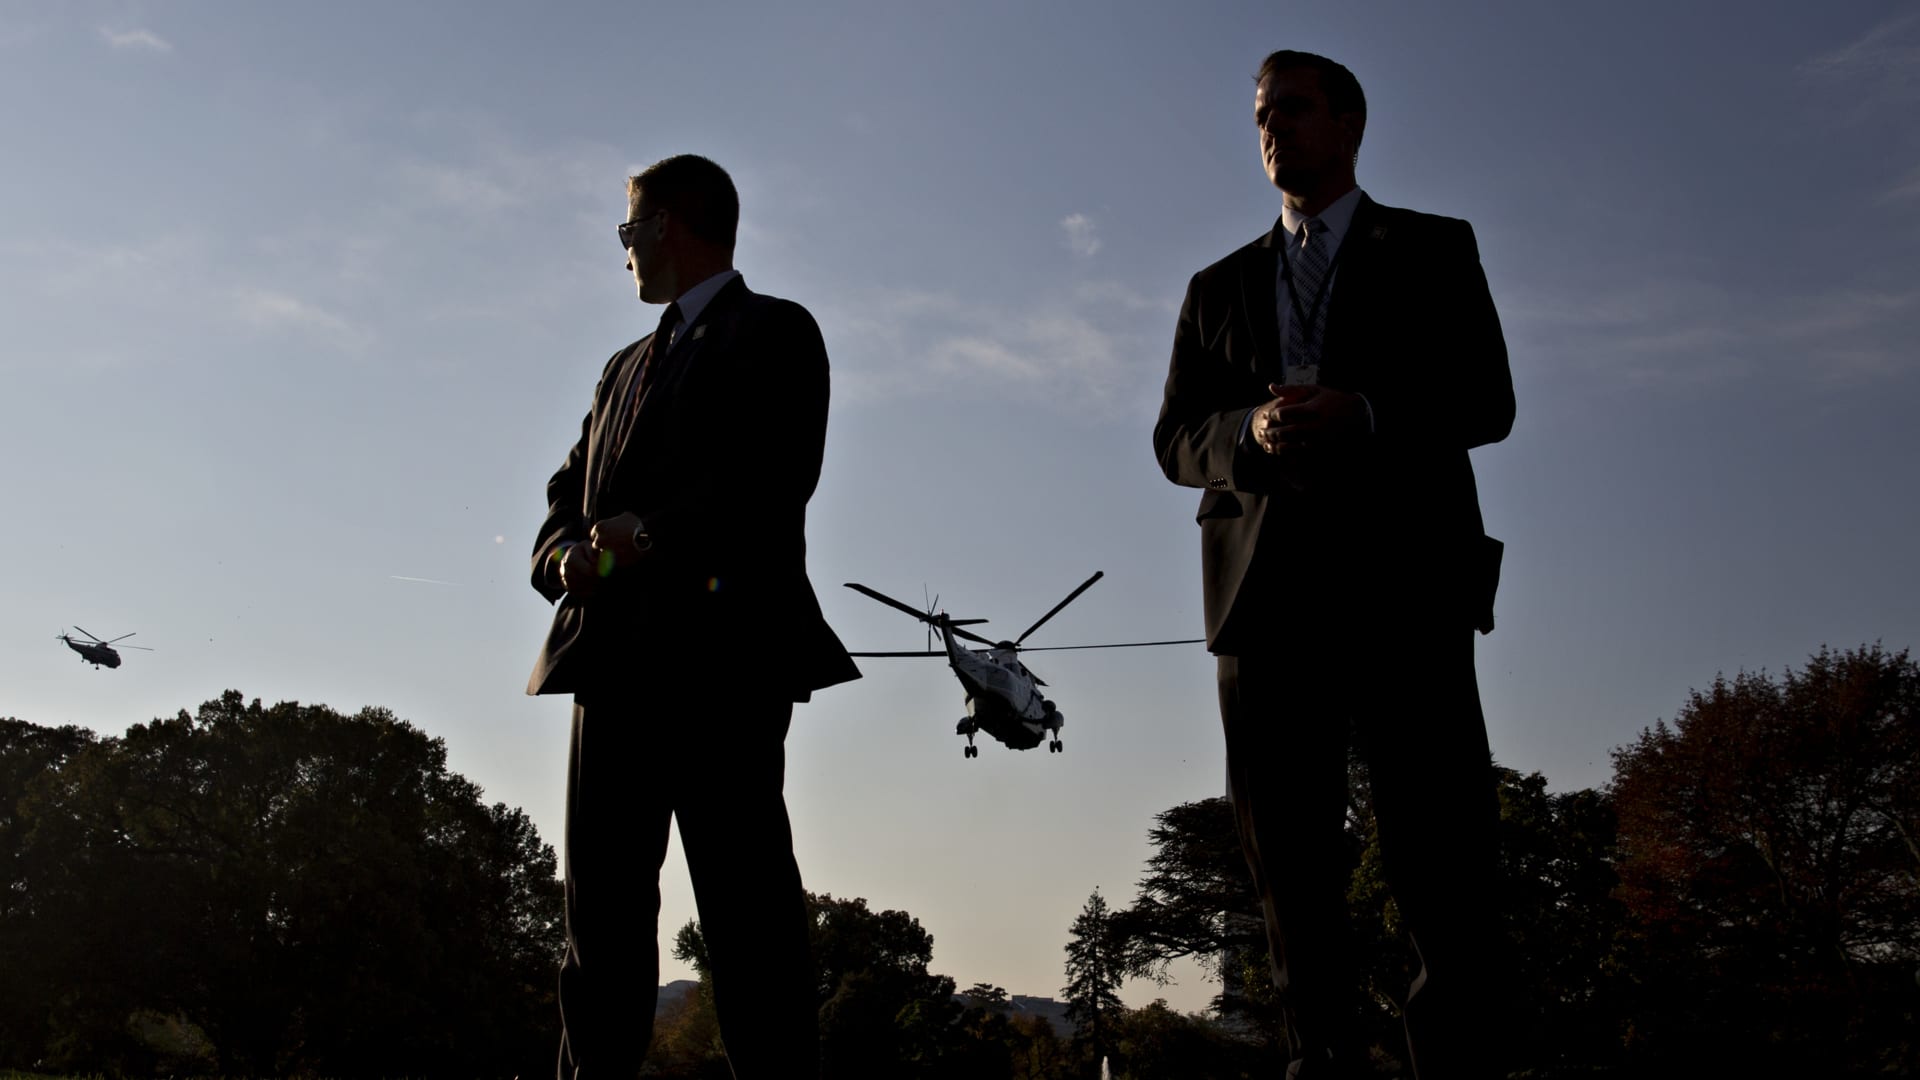 U.S. Secret Service agents stand watch as Marine One, with U.S. President Donald Trump on board, departs the South Lawn of the White House in Washington, D.C., U.S., on Friday, Nov. 3, 2017.